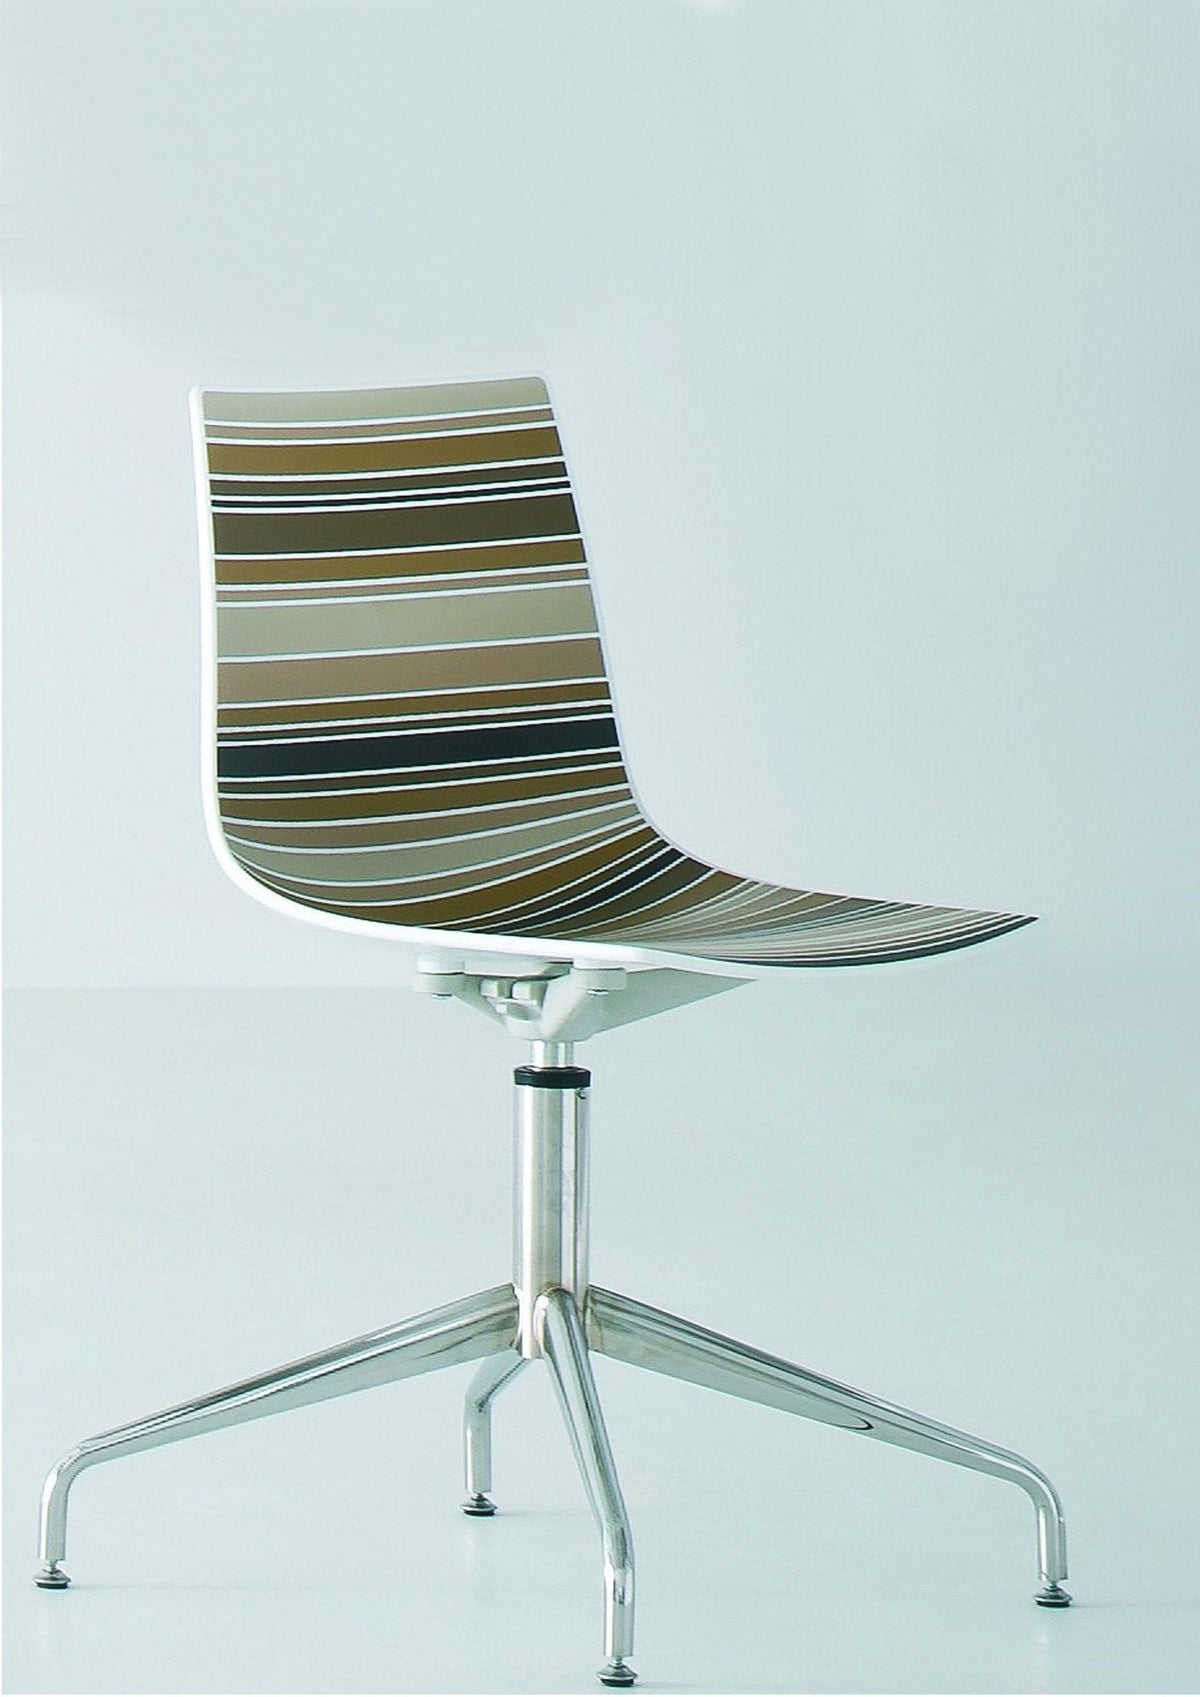 Colorfive Side Chair c/w Spider Base-Gaber-Contract Furniture Store